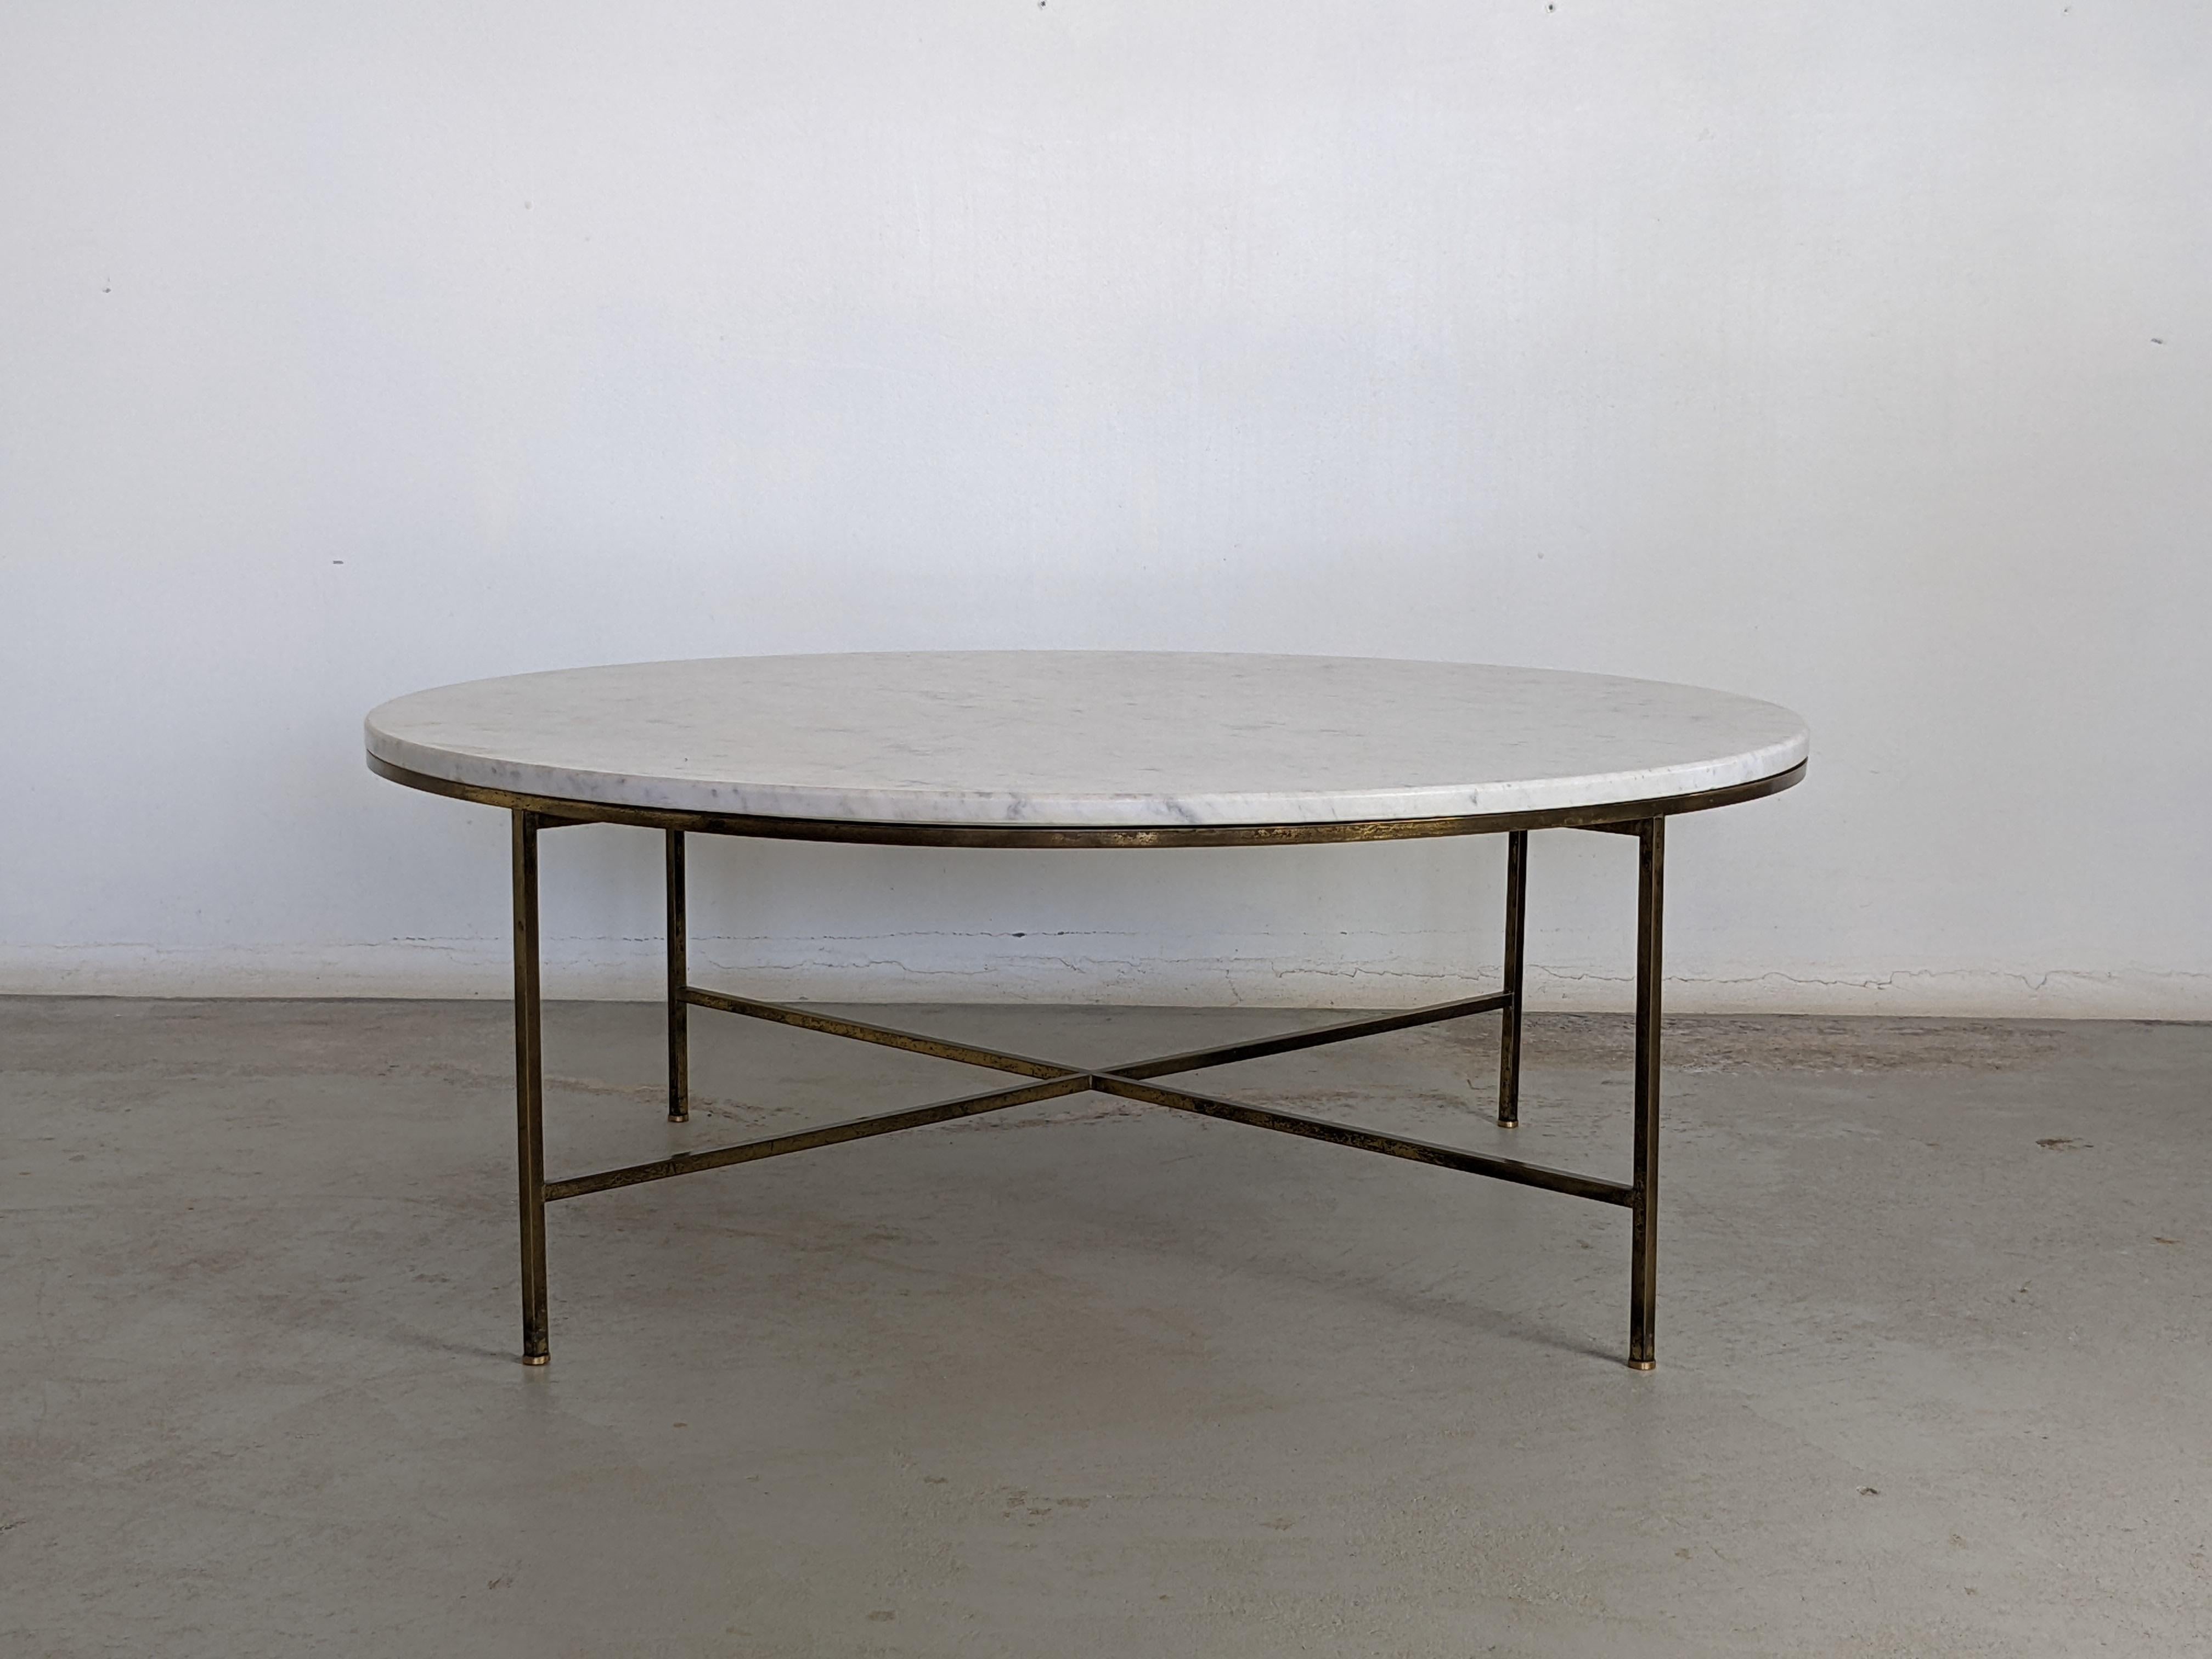 Coffee table designed by Paul McCobb for Calvin Furniture.
USA circa 1955.
Round marble top and solid brass base.
Original patina to the brass.